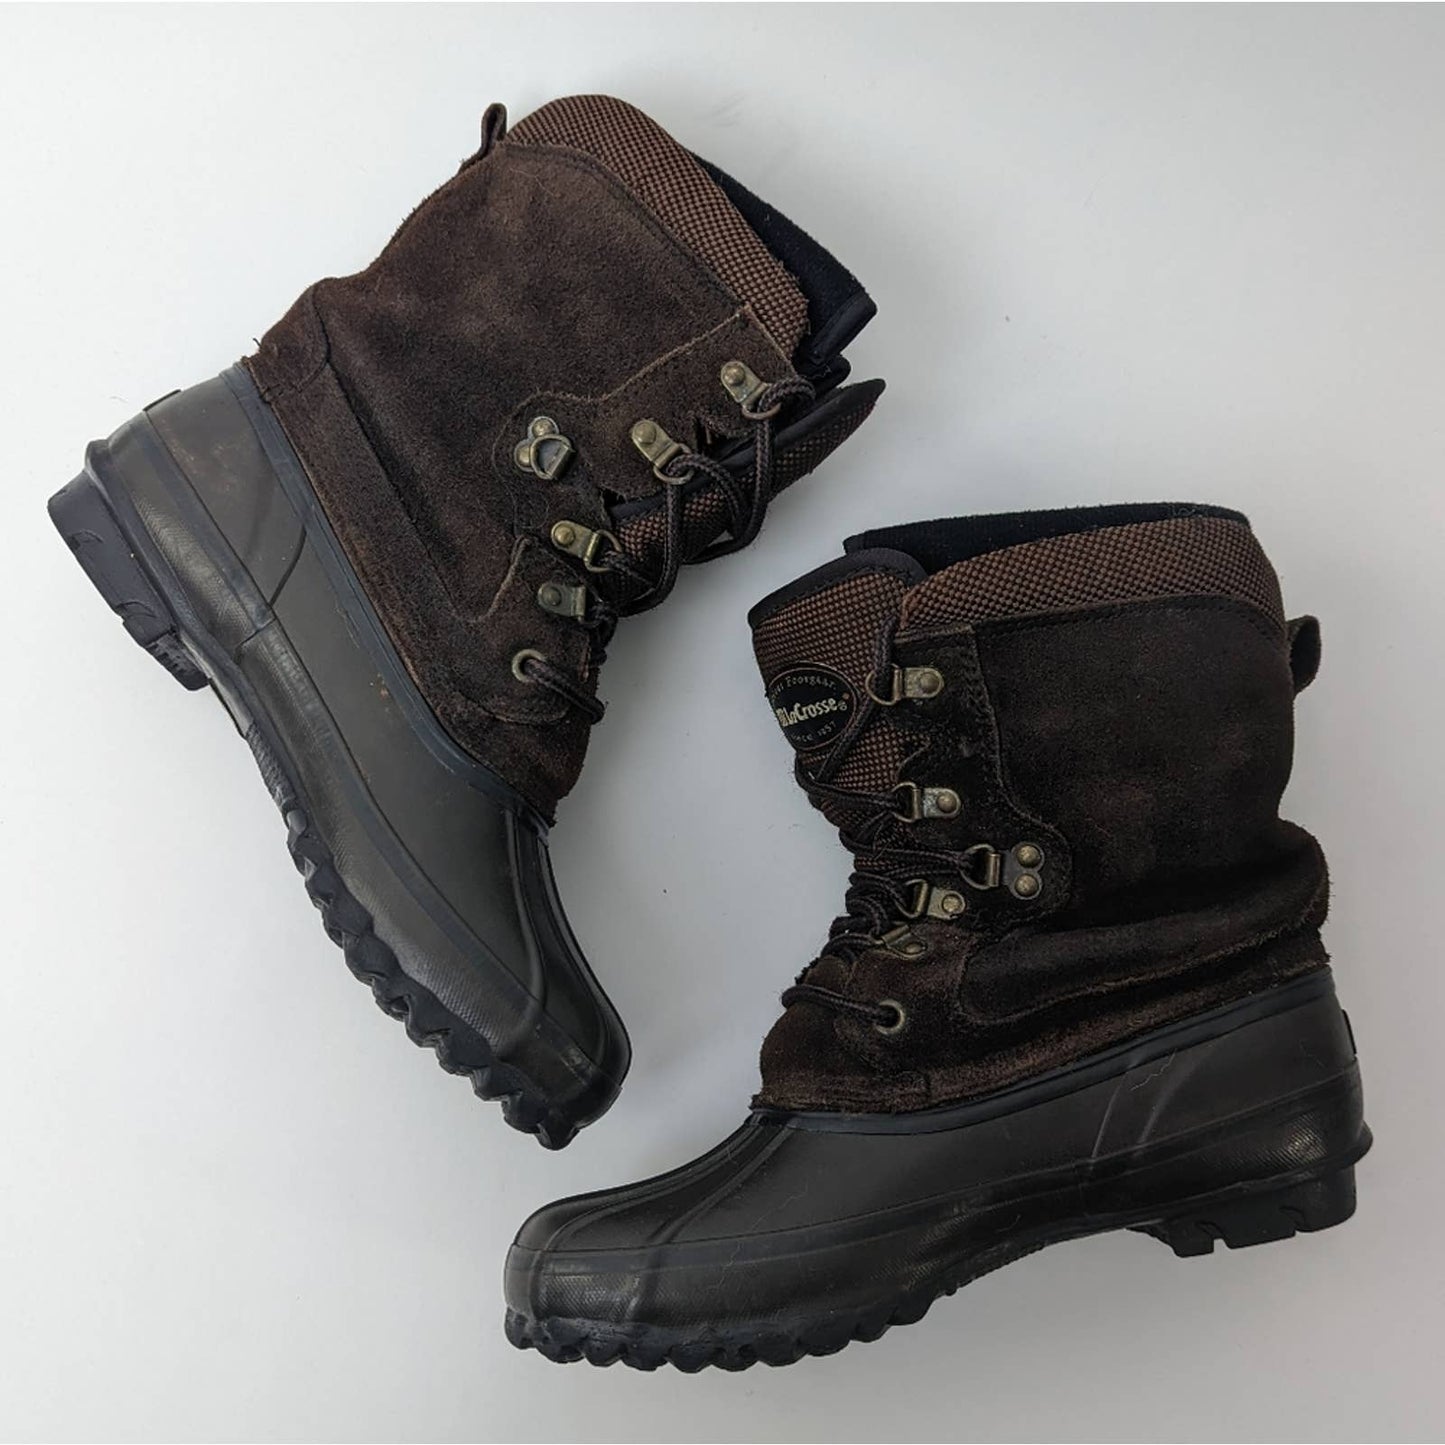 LaCrosse Thinsulate Leather Hunting Duck Boots - 6